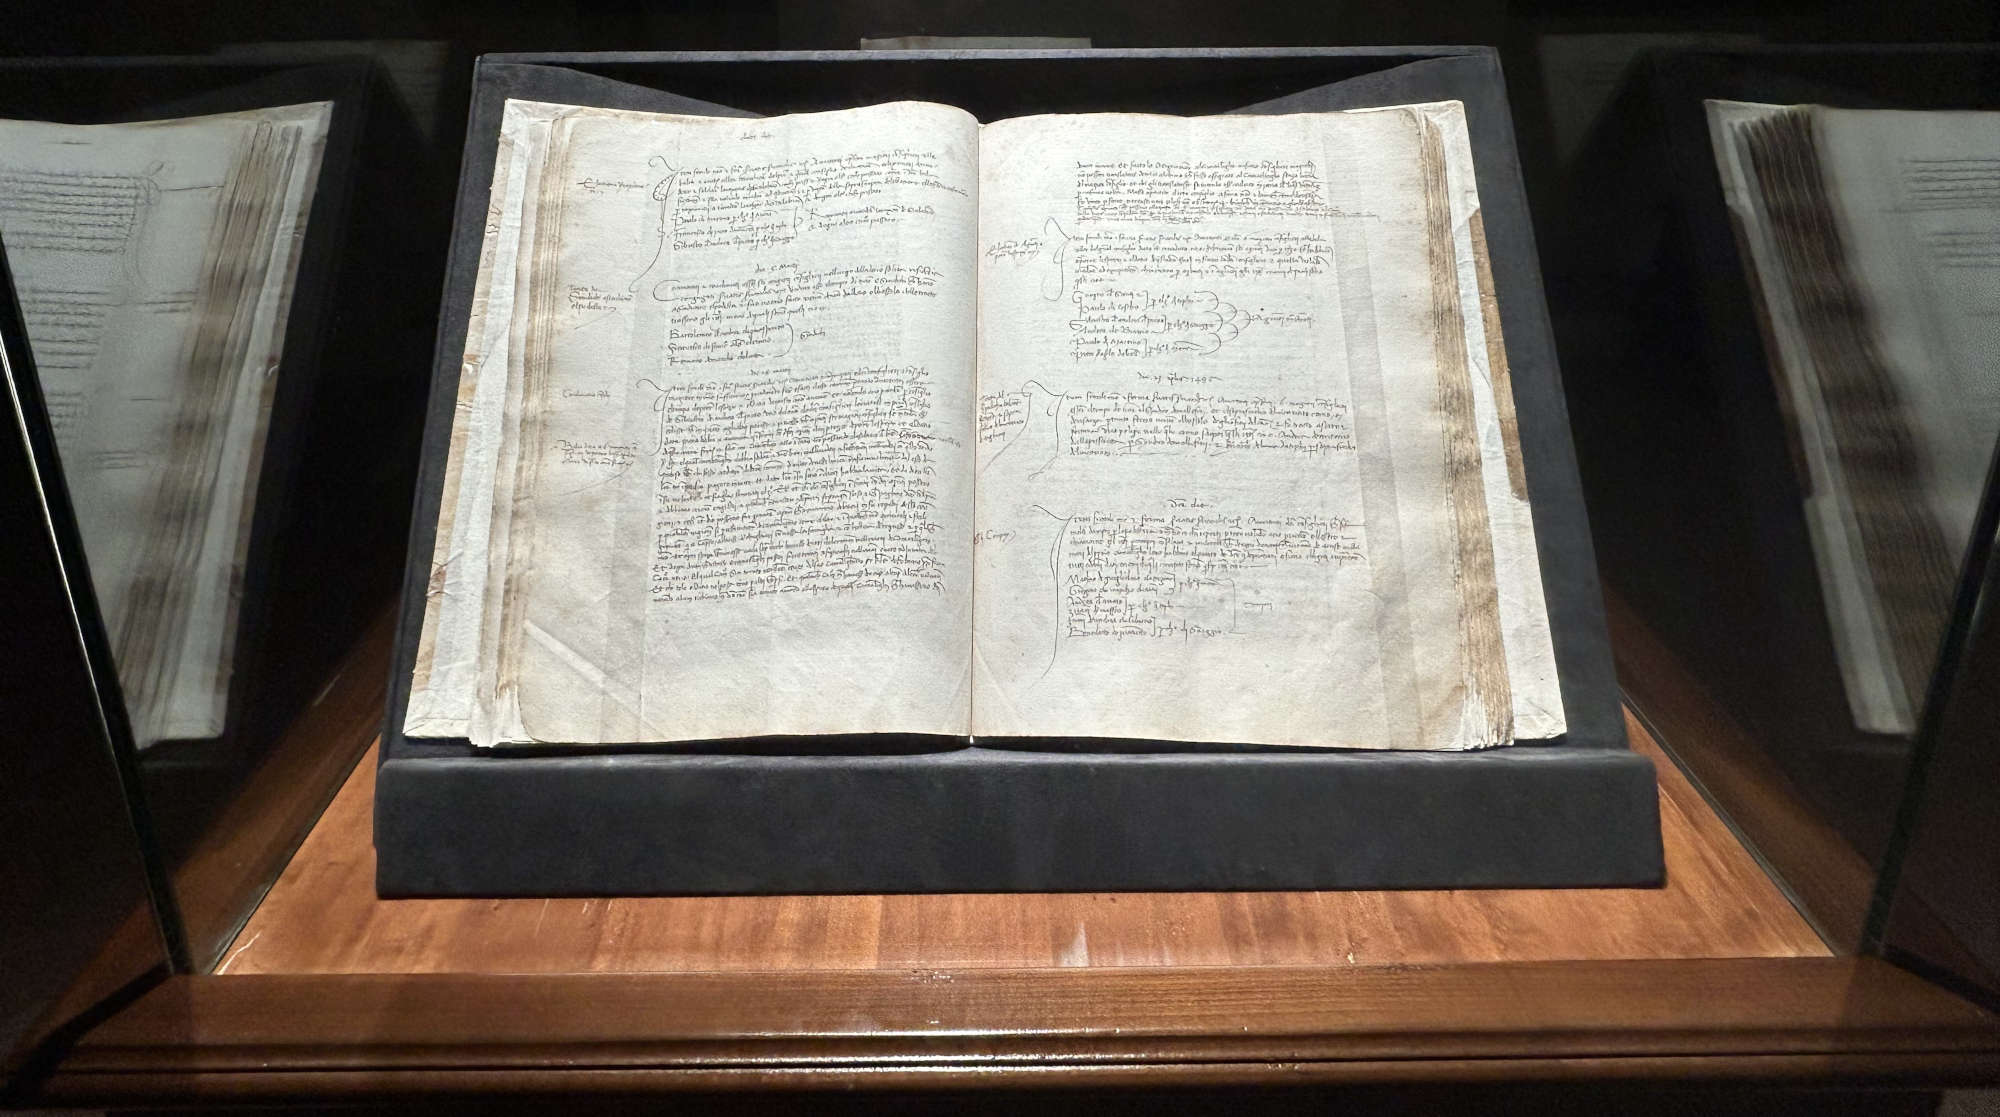 The copy of Michelangelo's baptismal act.